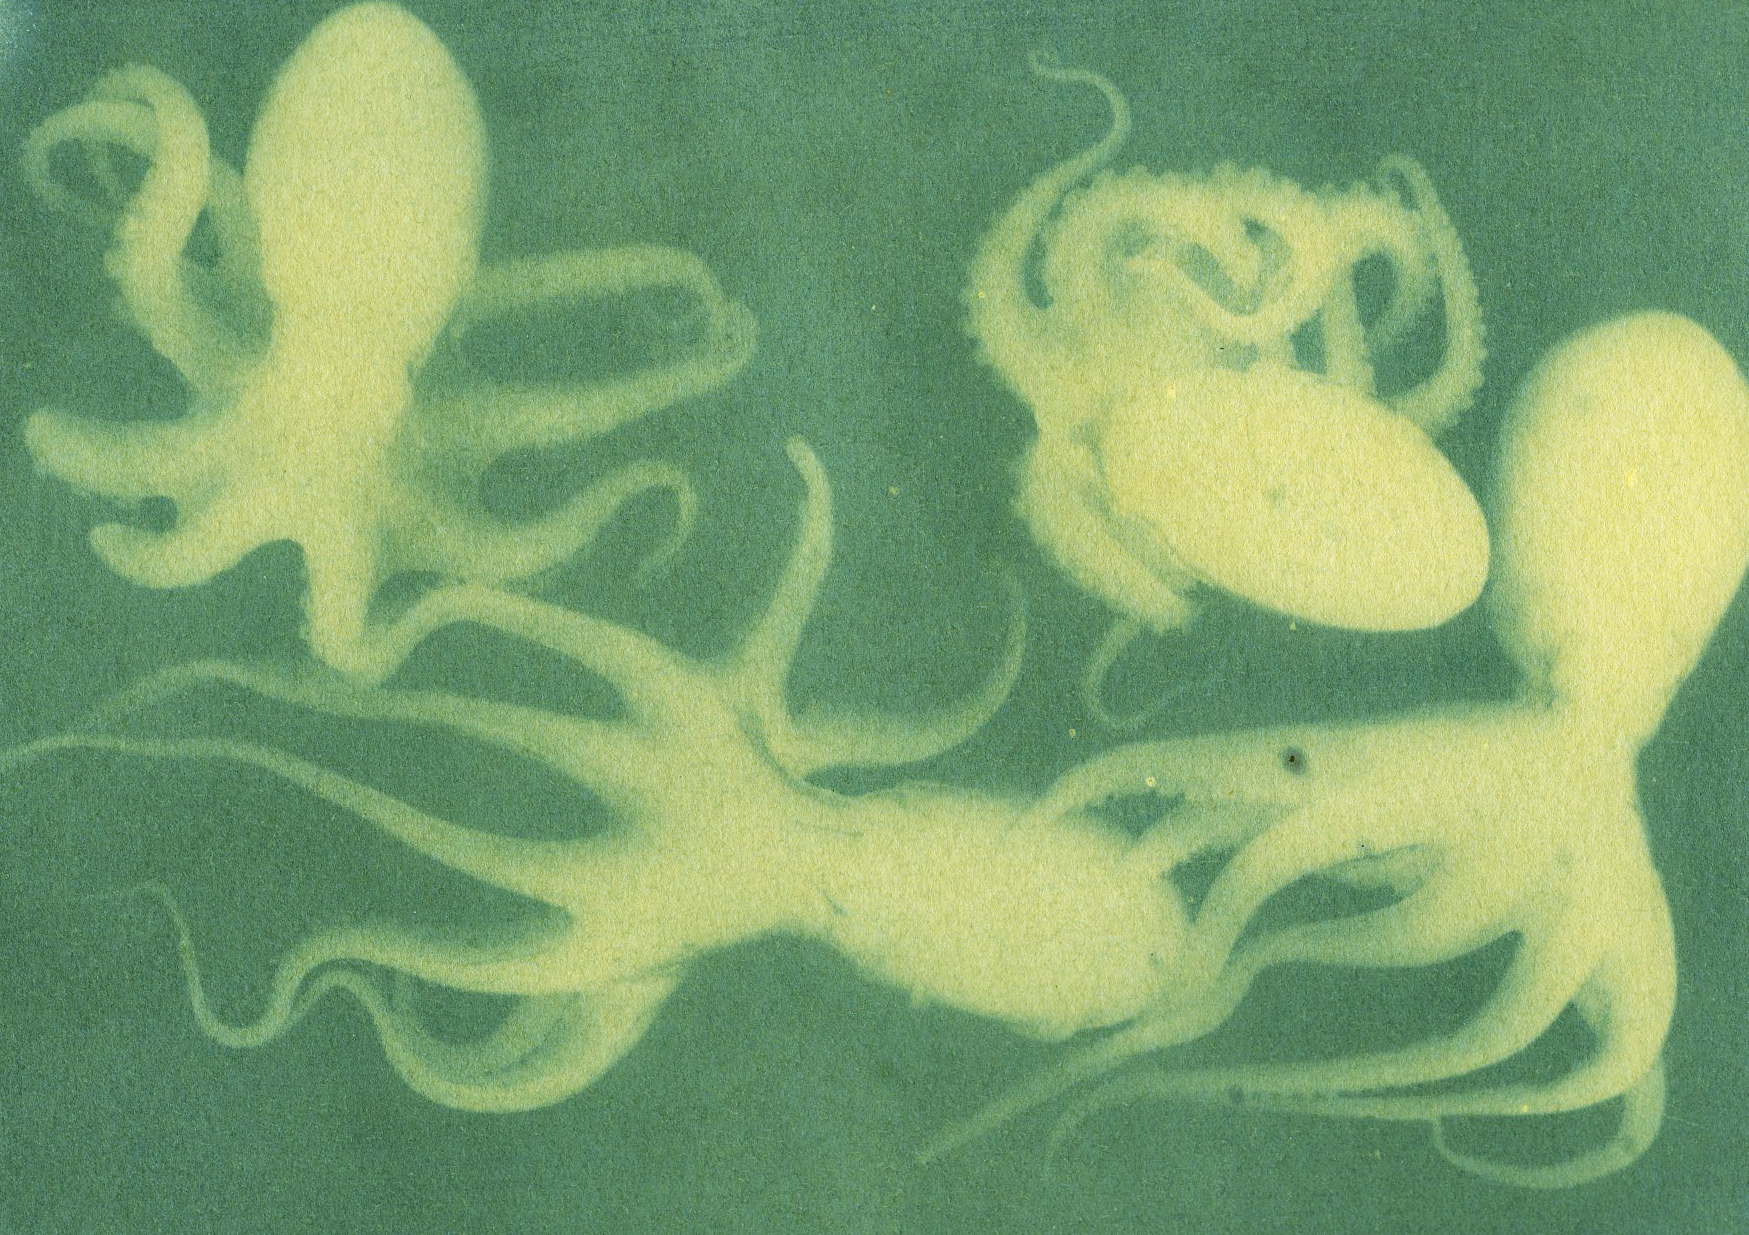  Octopus, Kale and grass emulsion anthotype, 2015 